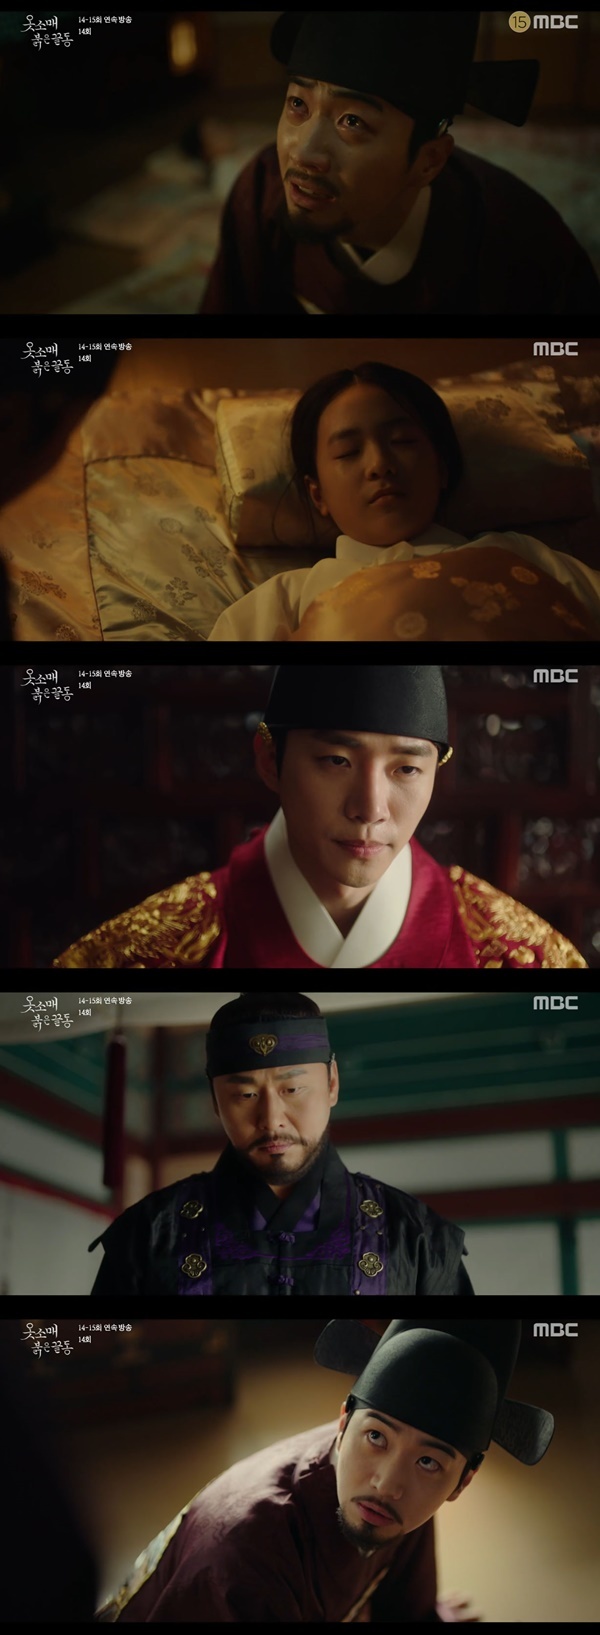 Kang Hoon, a brother-brother red end, suspected the death of his sister Park Seo-kyung.MBCs gilt drama Red End of Clothes Retail (playplayed by Jeong Hae-ri and directed by Jeong Ji-in/hereinafter, Sleeves), which was broadcast on the 25th, depicted the death of Lee Joon-ho, The Concubine Won Bin Hong (Park Seo-kyung).Hong Duk-ro, who witnessed the death of his sister Won Bin Hong, said, Won Bin, the wife of the degradation, has left the world.I can not blame the word, said Lee. It is a mistake of a person who has not been able to take a good look at a precious person.Send a person to comfort Won Bins mother and prepare for the regular procedure. Hong Duk-ro was unable to break out of the shock easily, and Kang Tae-ho (Oh Dae-hwan), who saw it, comforted him, Be strong; no matter how painful you are, you have to ask and forget who you left.However, Hong Duk-ro was angry, saying, My sister, who was fine, was killed (and) could you easily forget.Kang Tae-ho, who heard this, asked, What do you mean, you are being fleshed? So Hong Duk-ro said, Yes, my sister is fleshed.